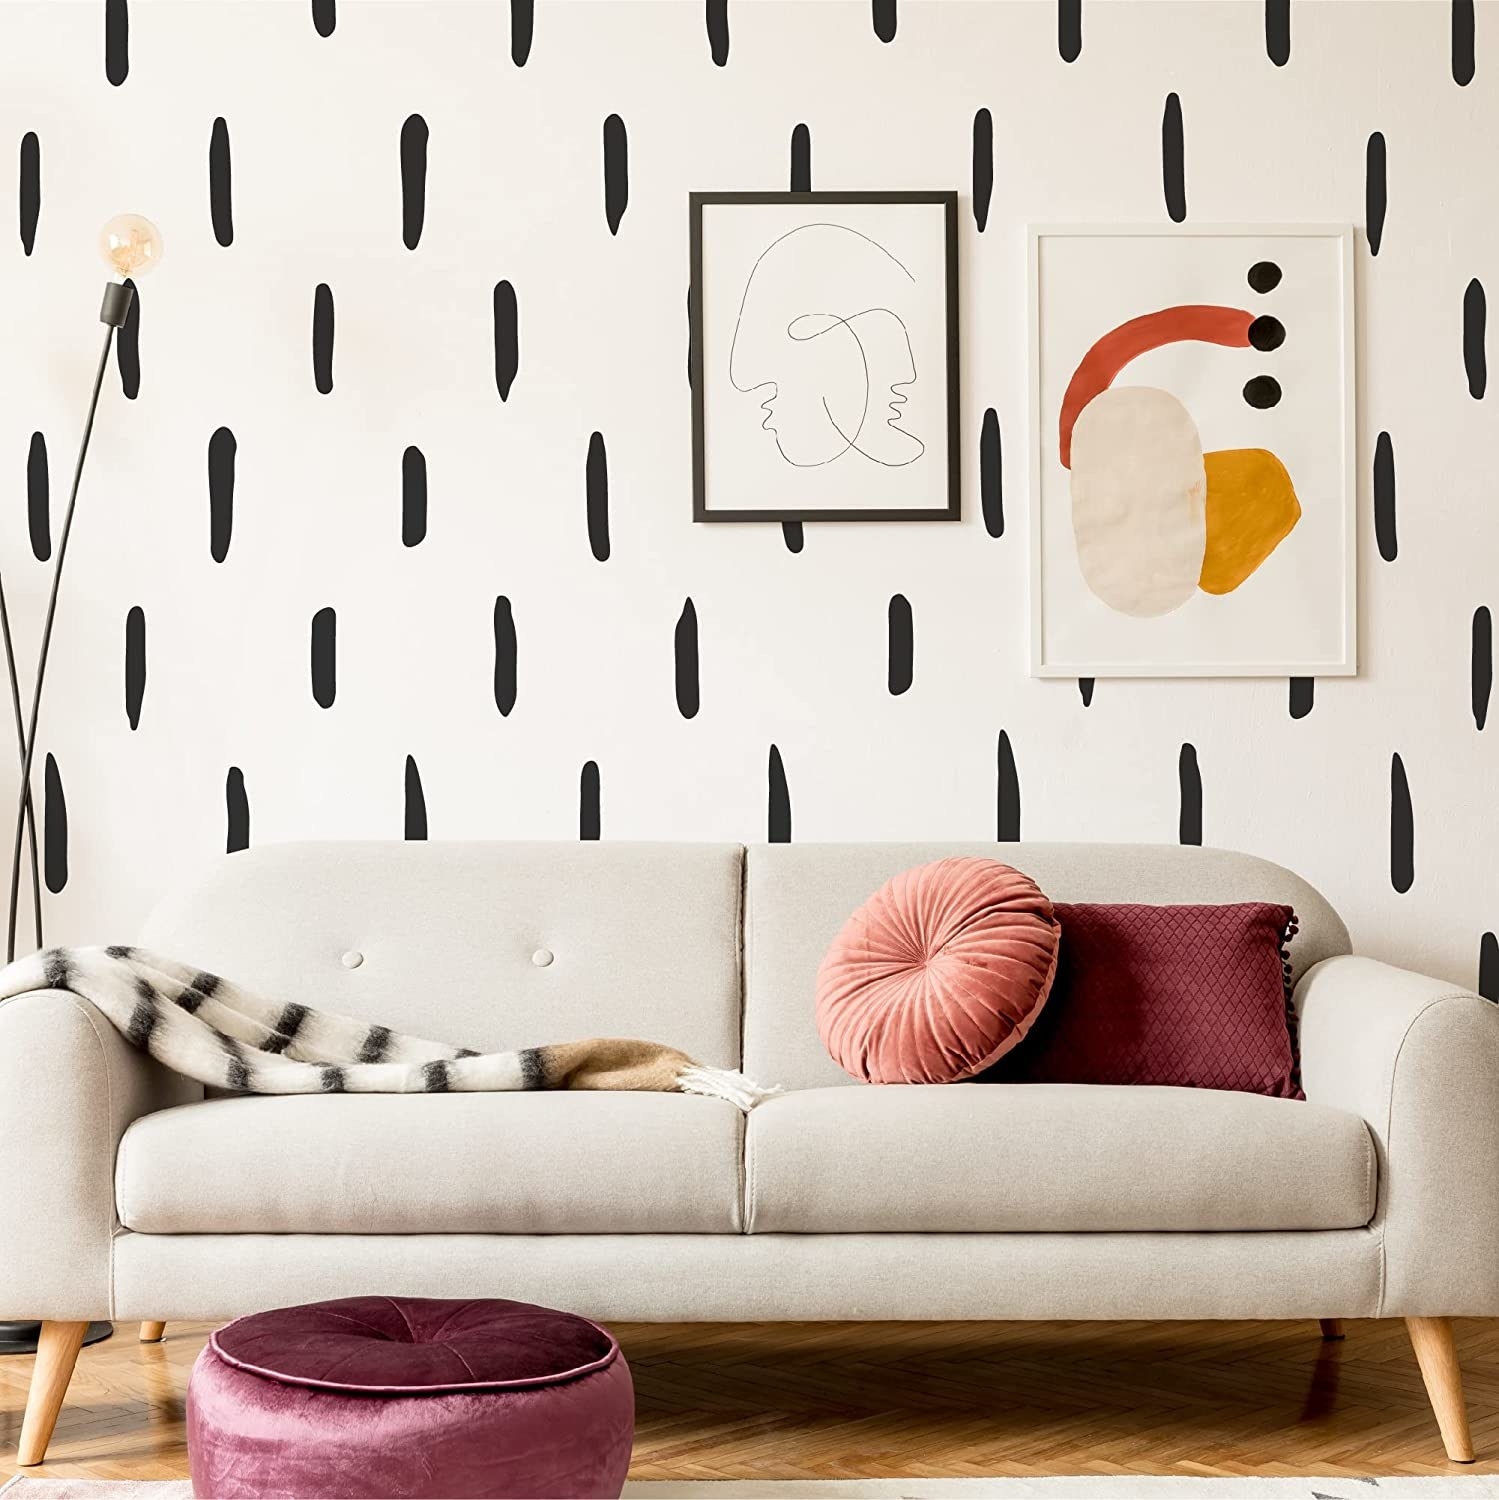 The wallpaper is shown behind a sofa